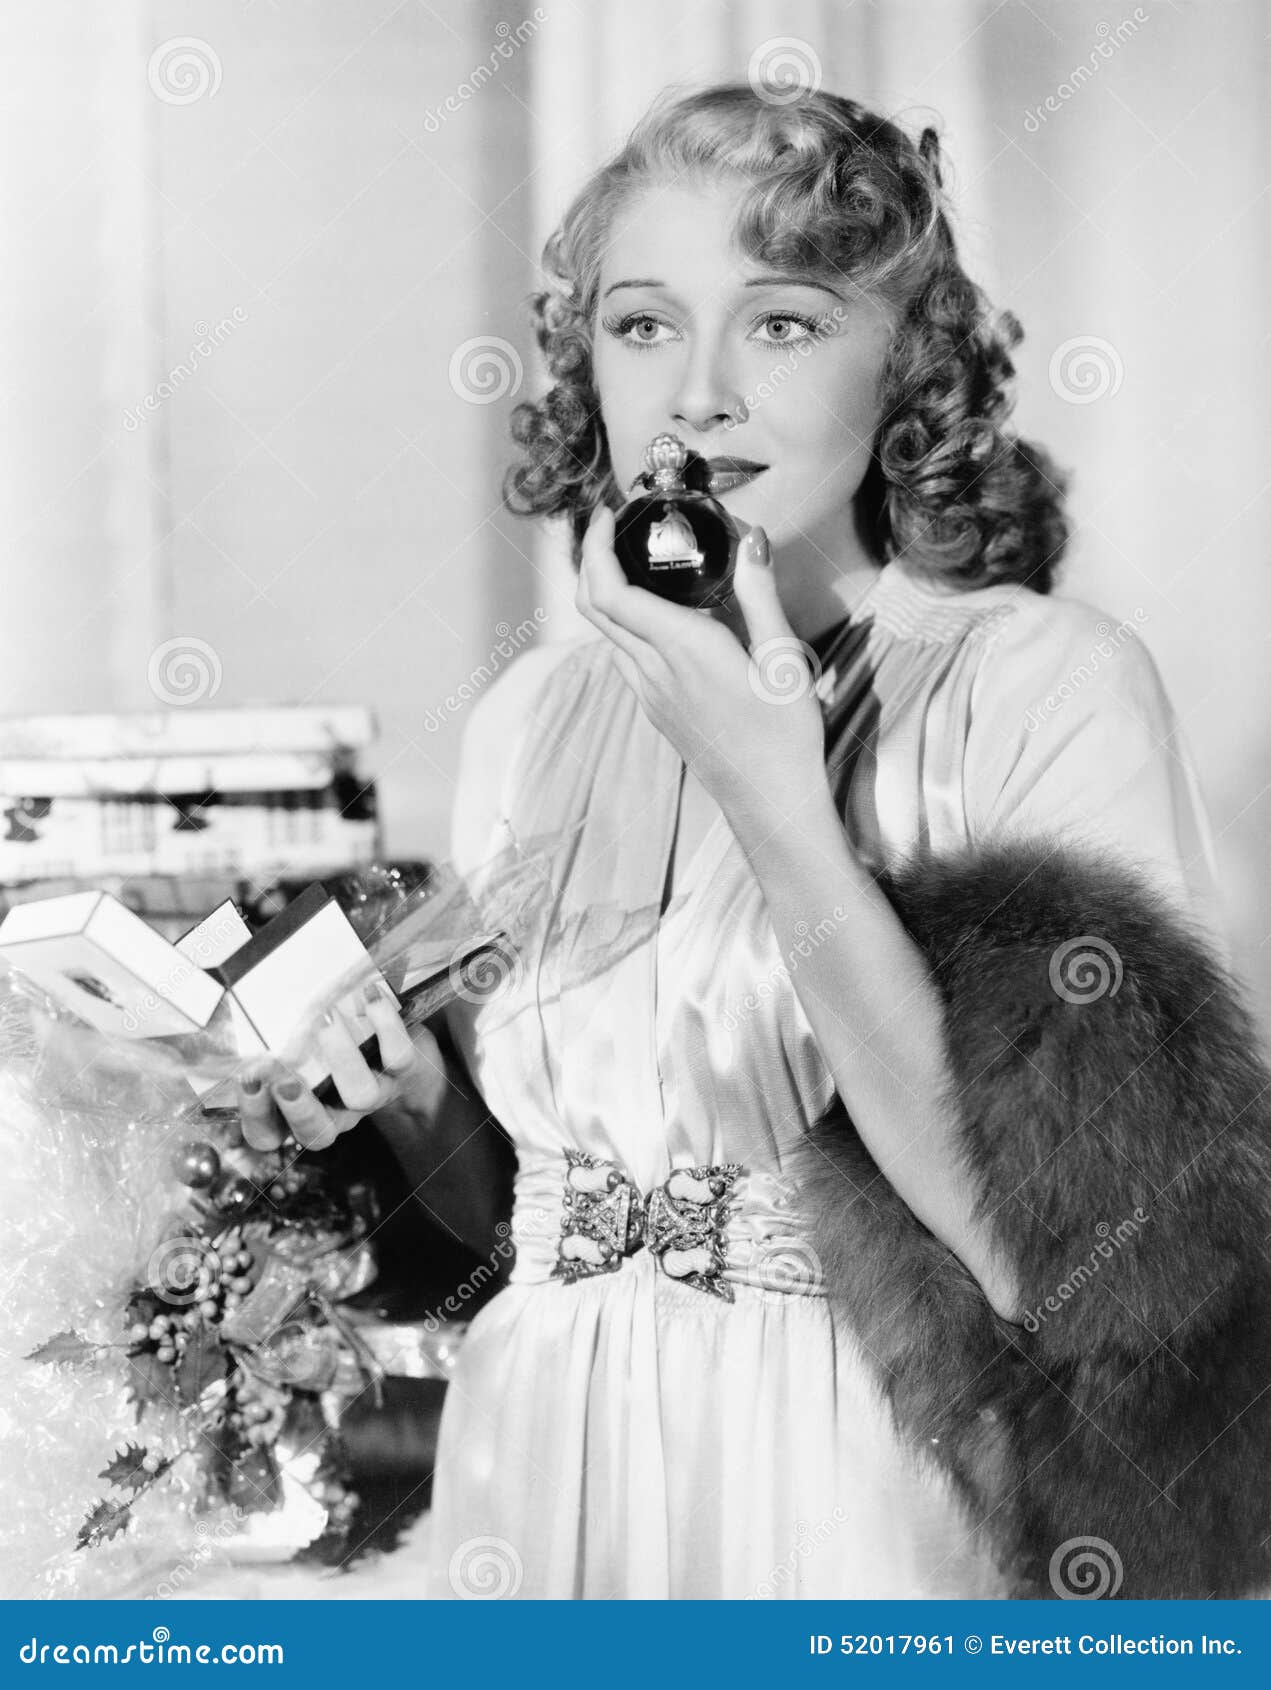 young woman smelling perfume